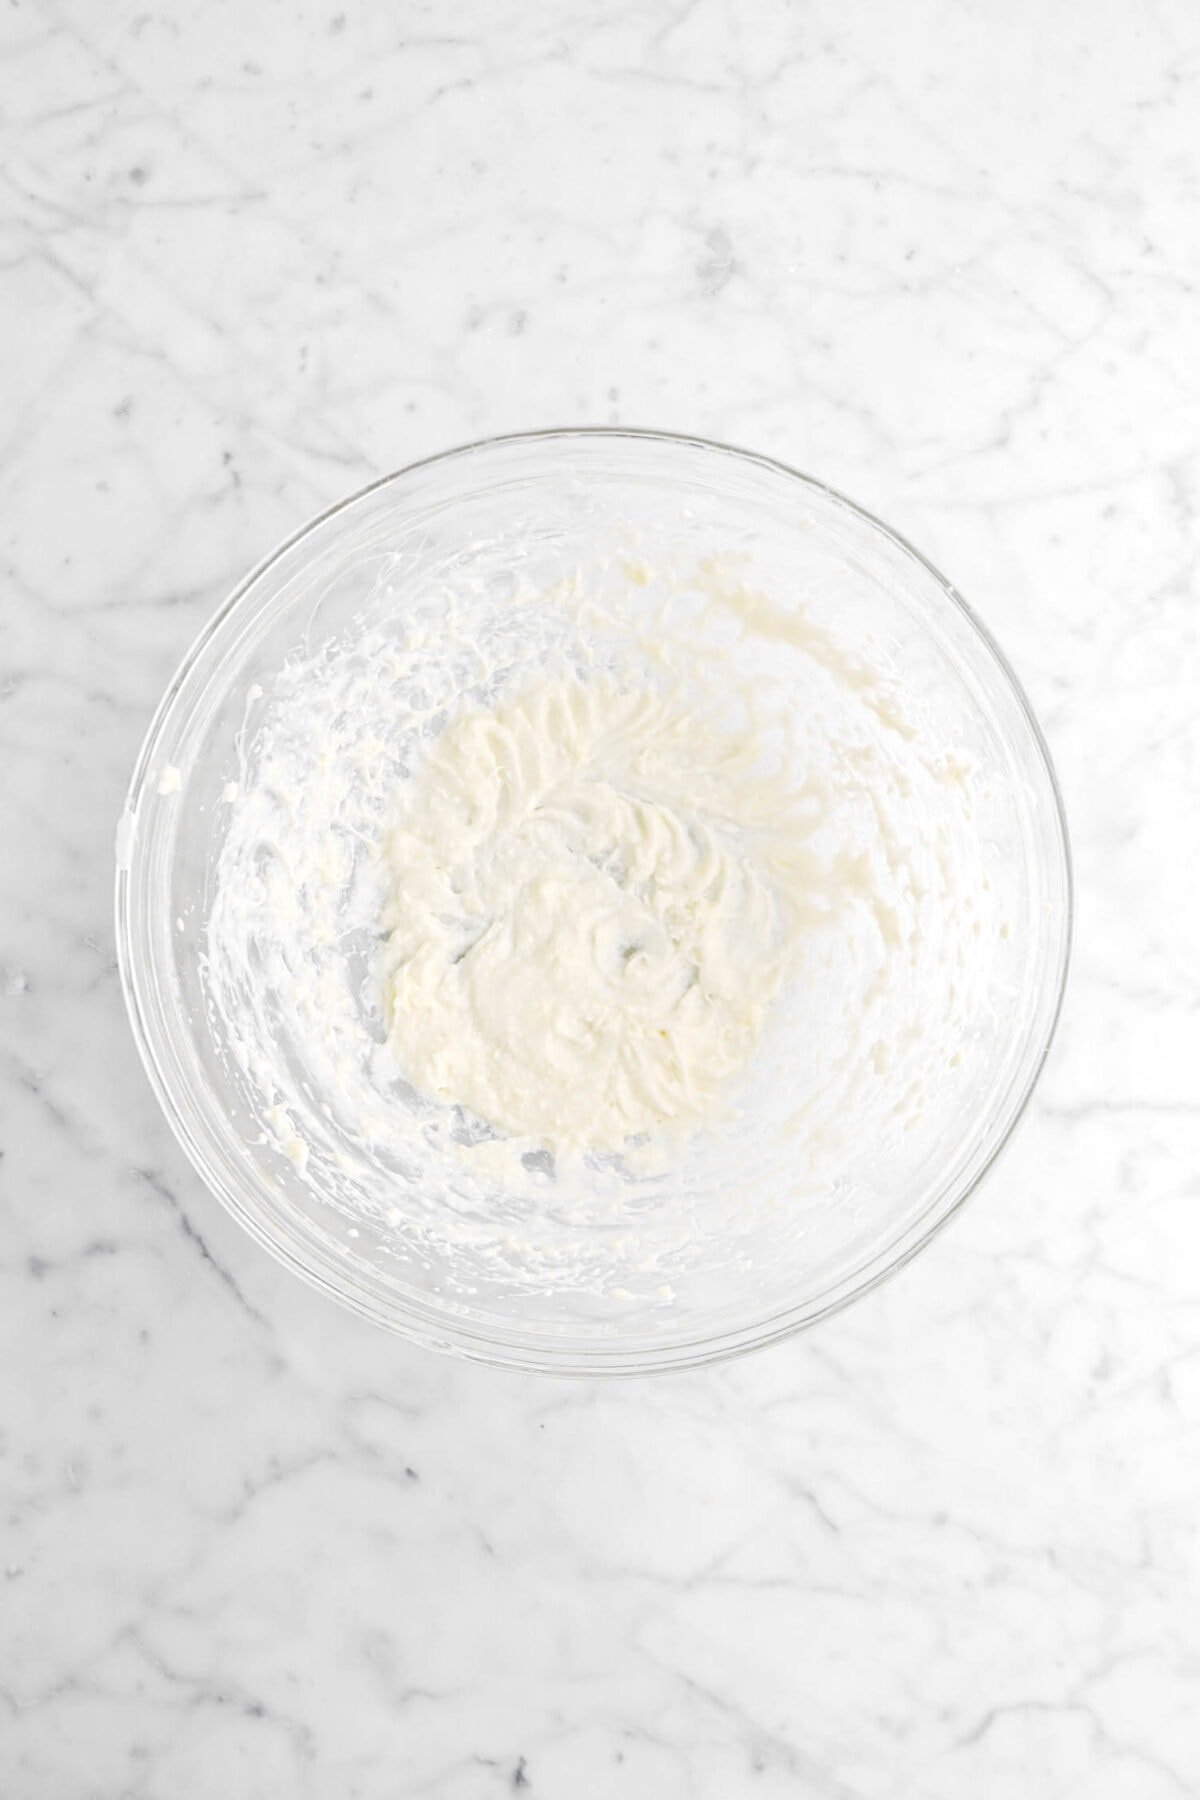 whipped butter mixture in glass bowl